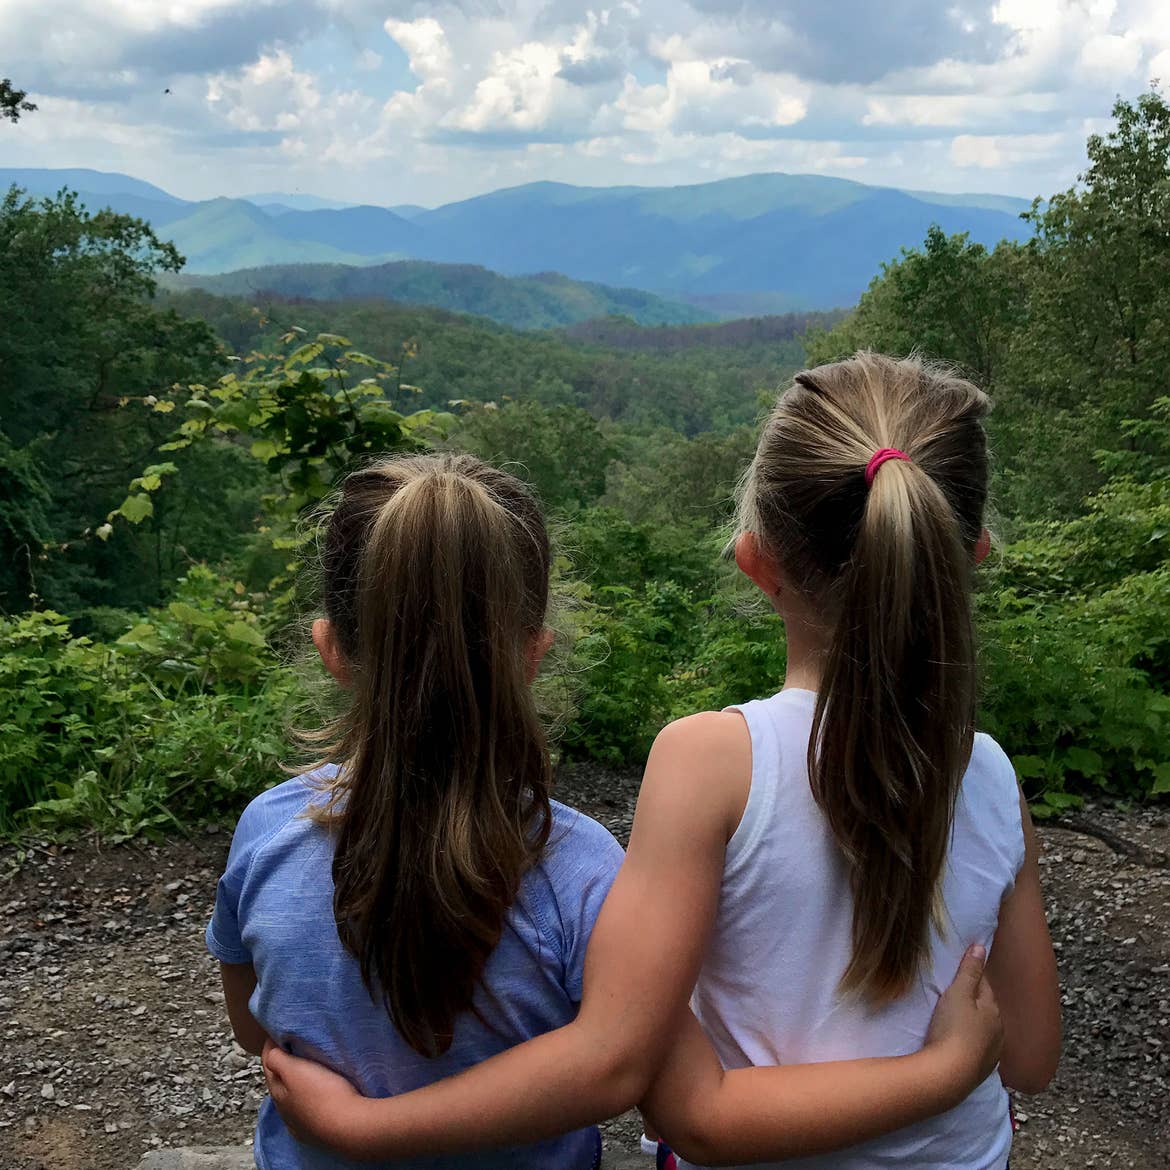 Author, Chris Johnstons' daughters, Kyndall (right), and Kyler (left) face out to the trees of the Great Smoky Mountains while wrapping one arm around each other.